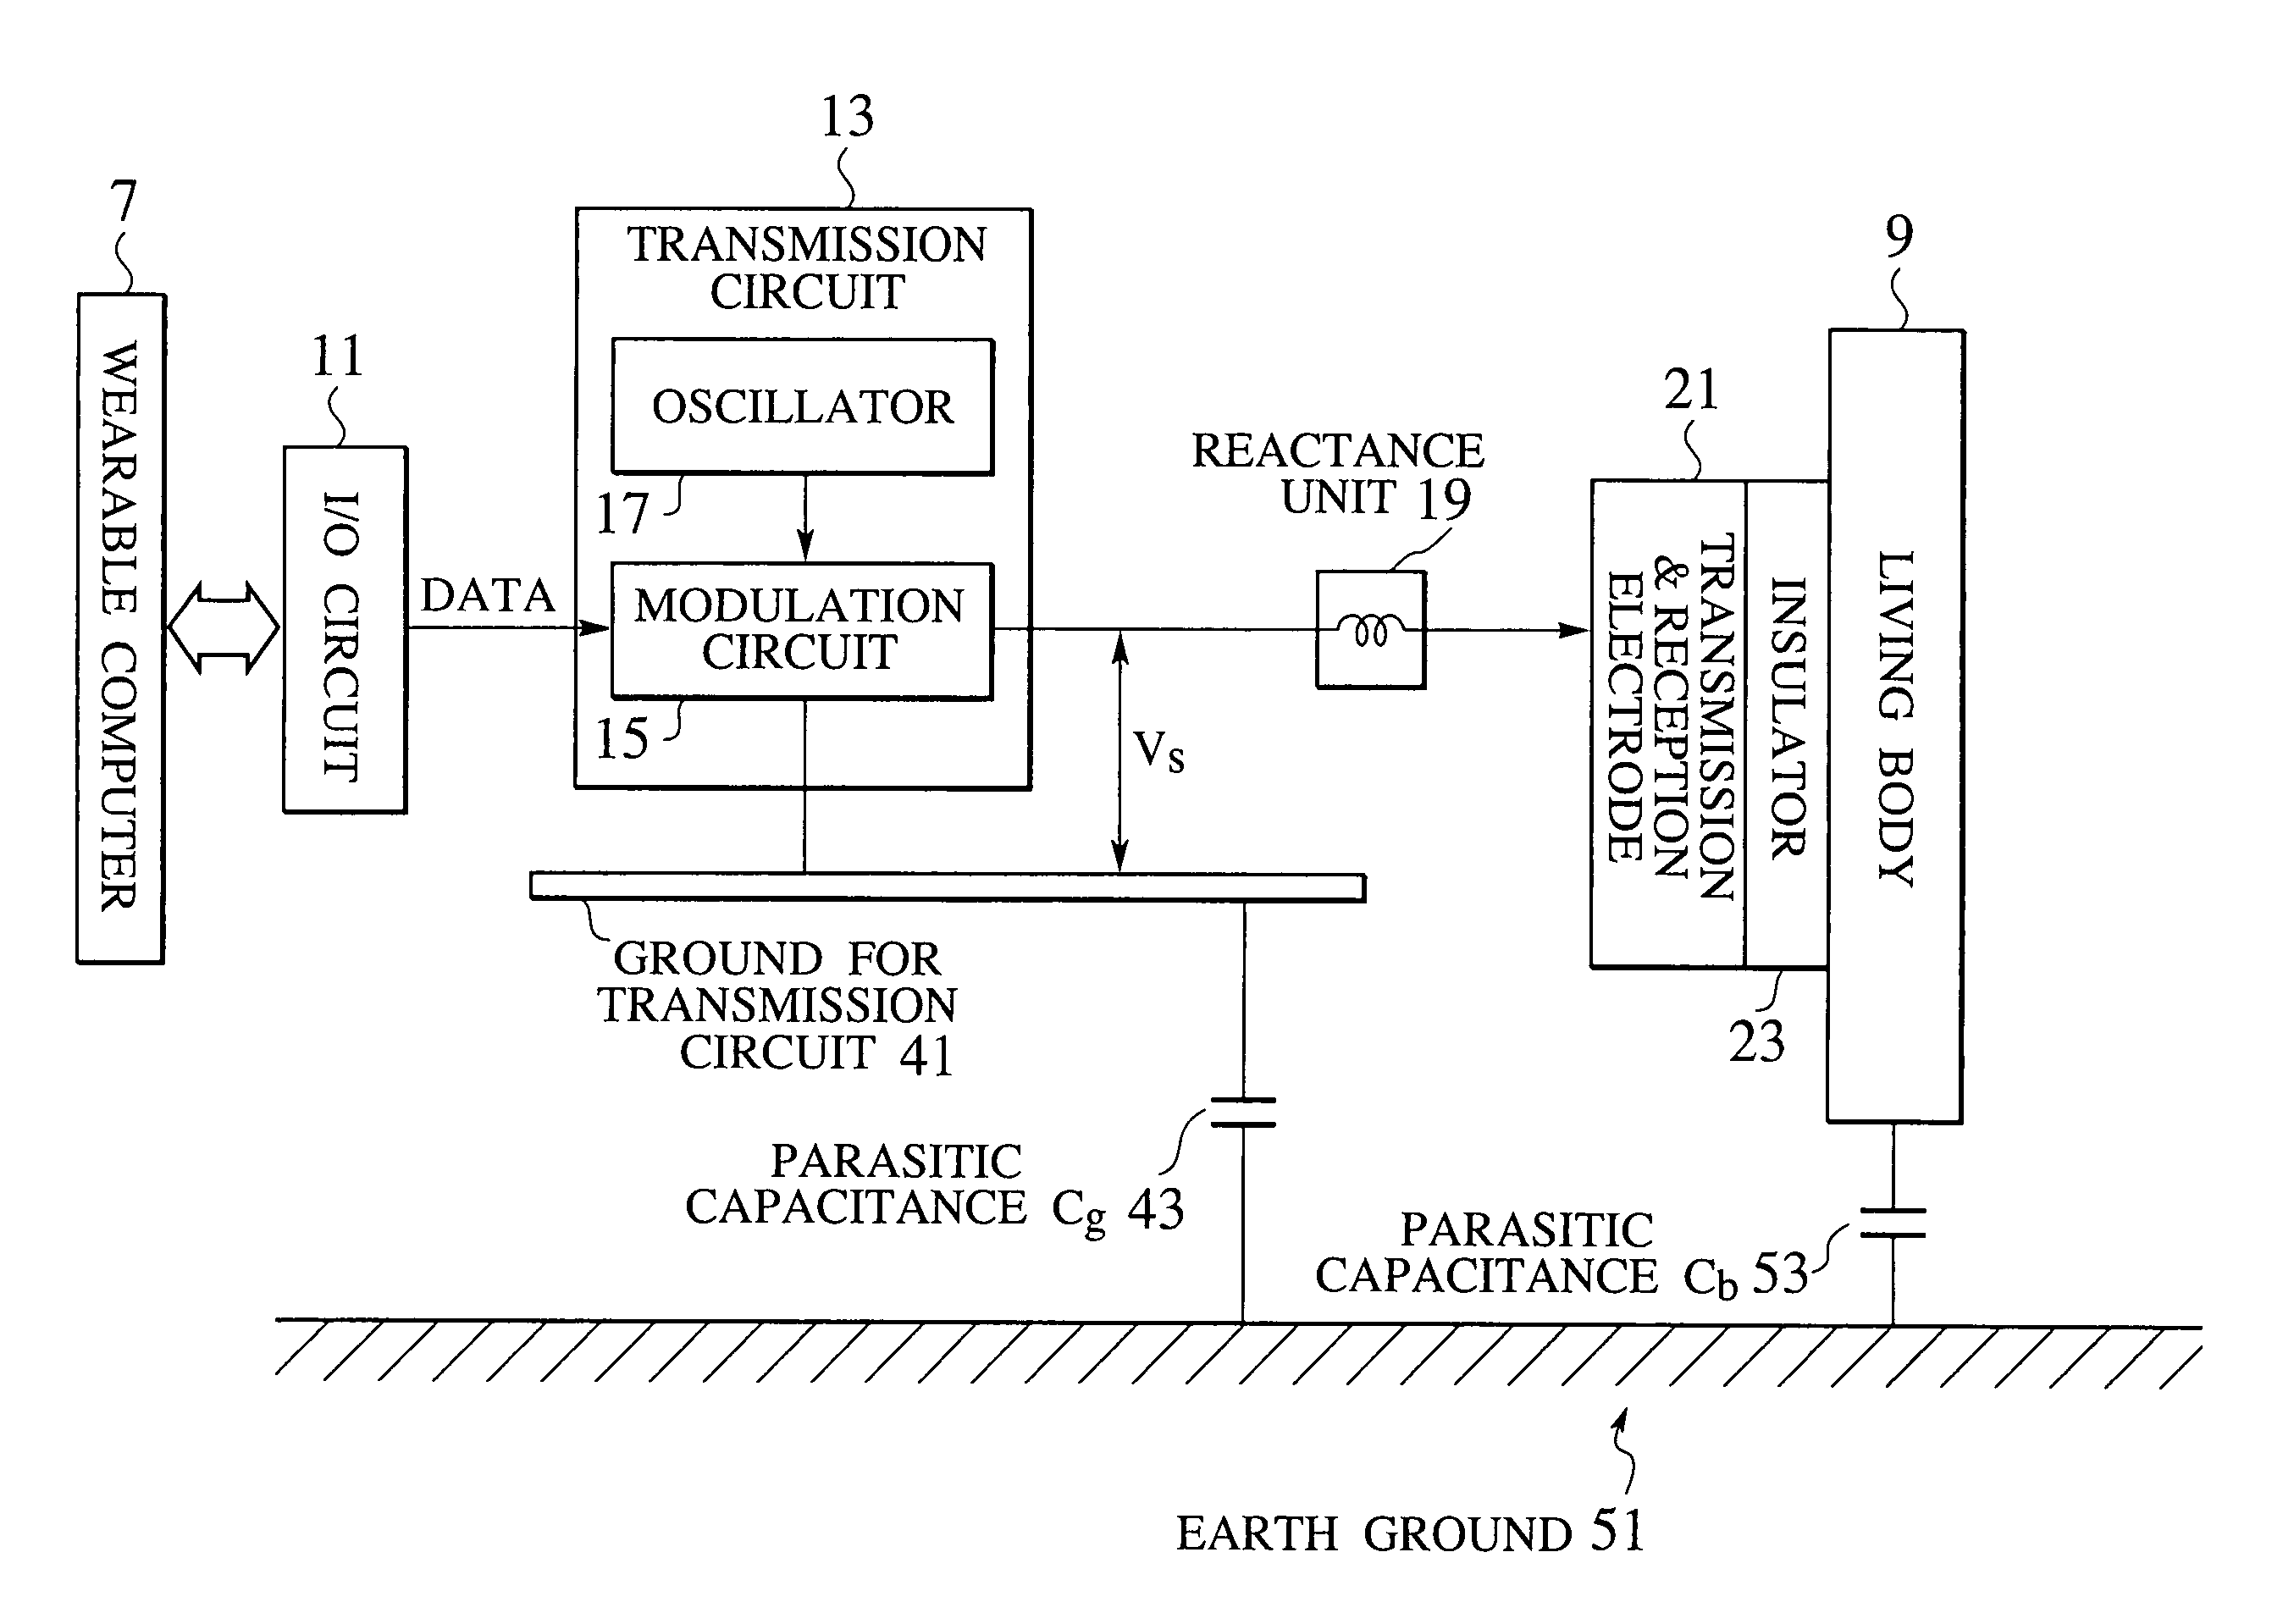 Transceiver capable of causing series resonance with parasitic capacitance